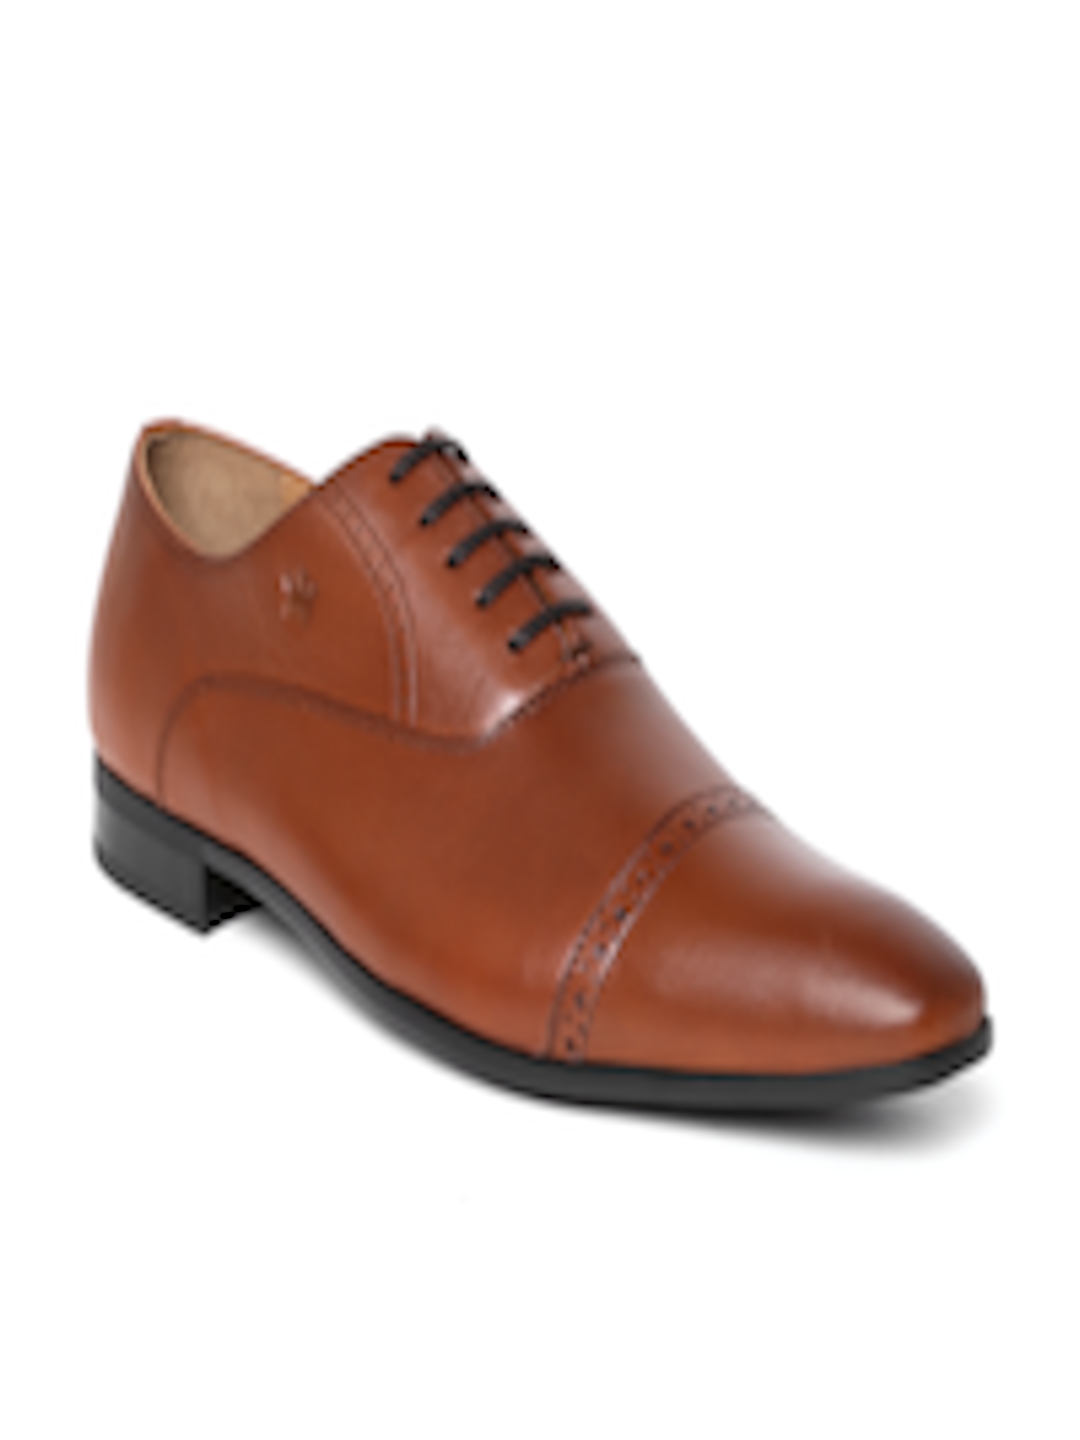 Buy Louis Philippe Men Brown Leather Formal Oxfords - Formal Shoes for Men 9450649 | Myntra